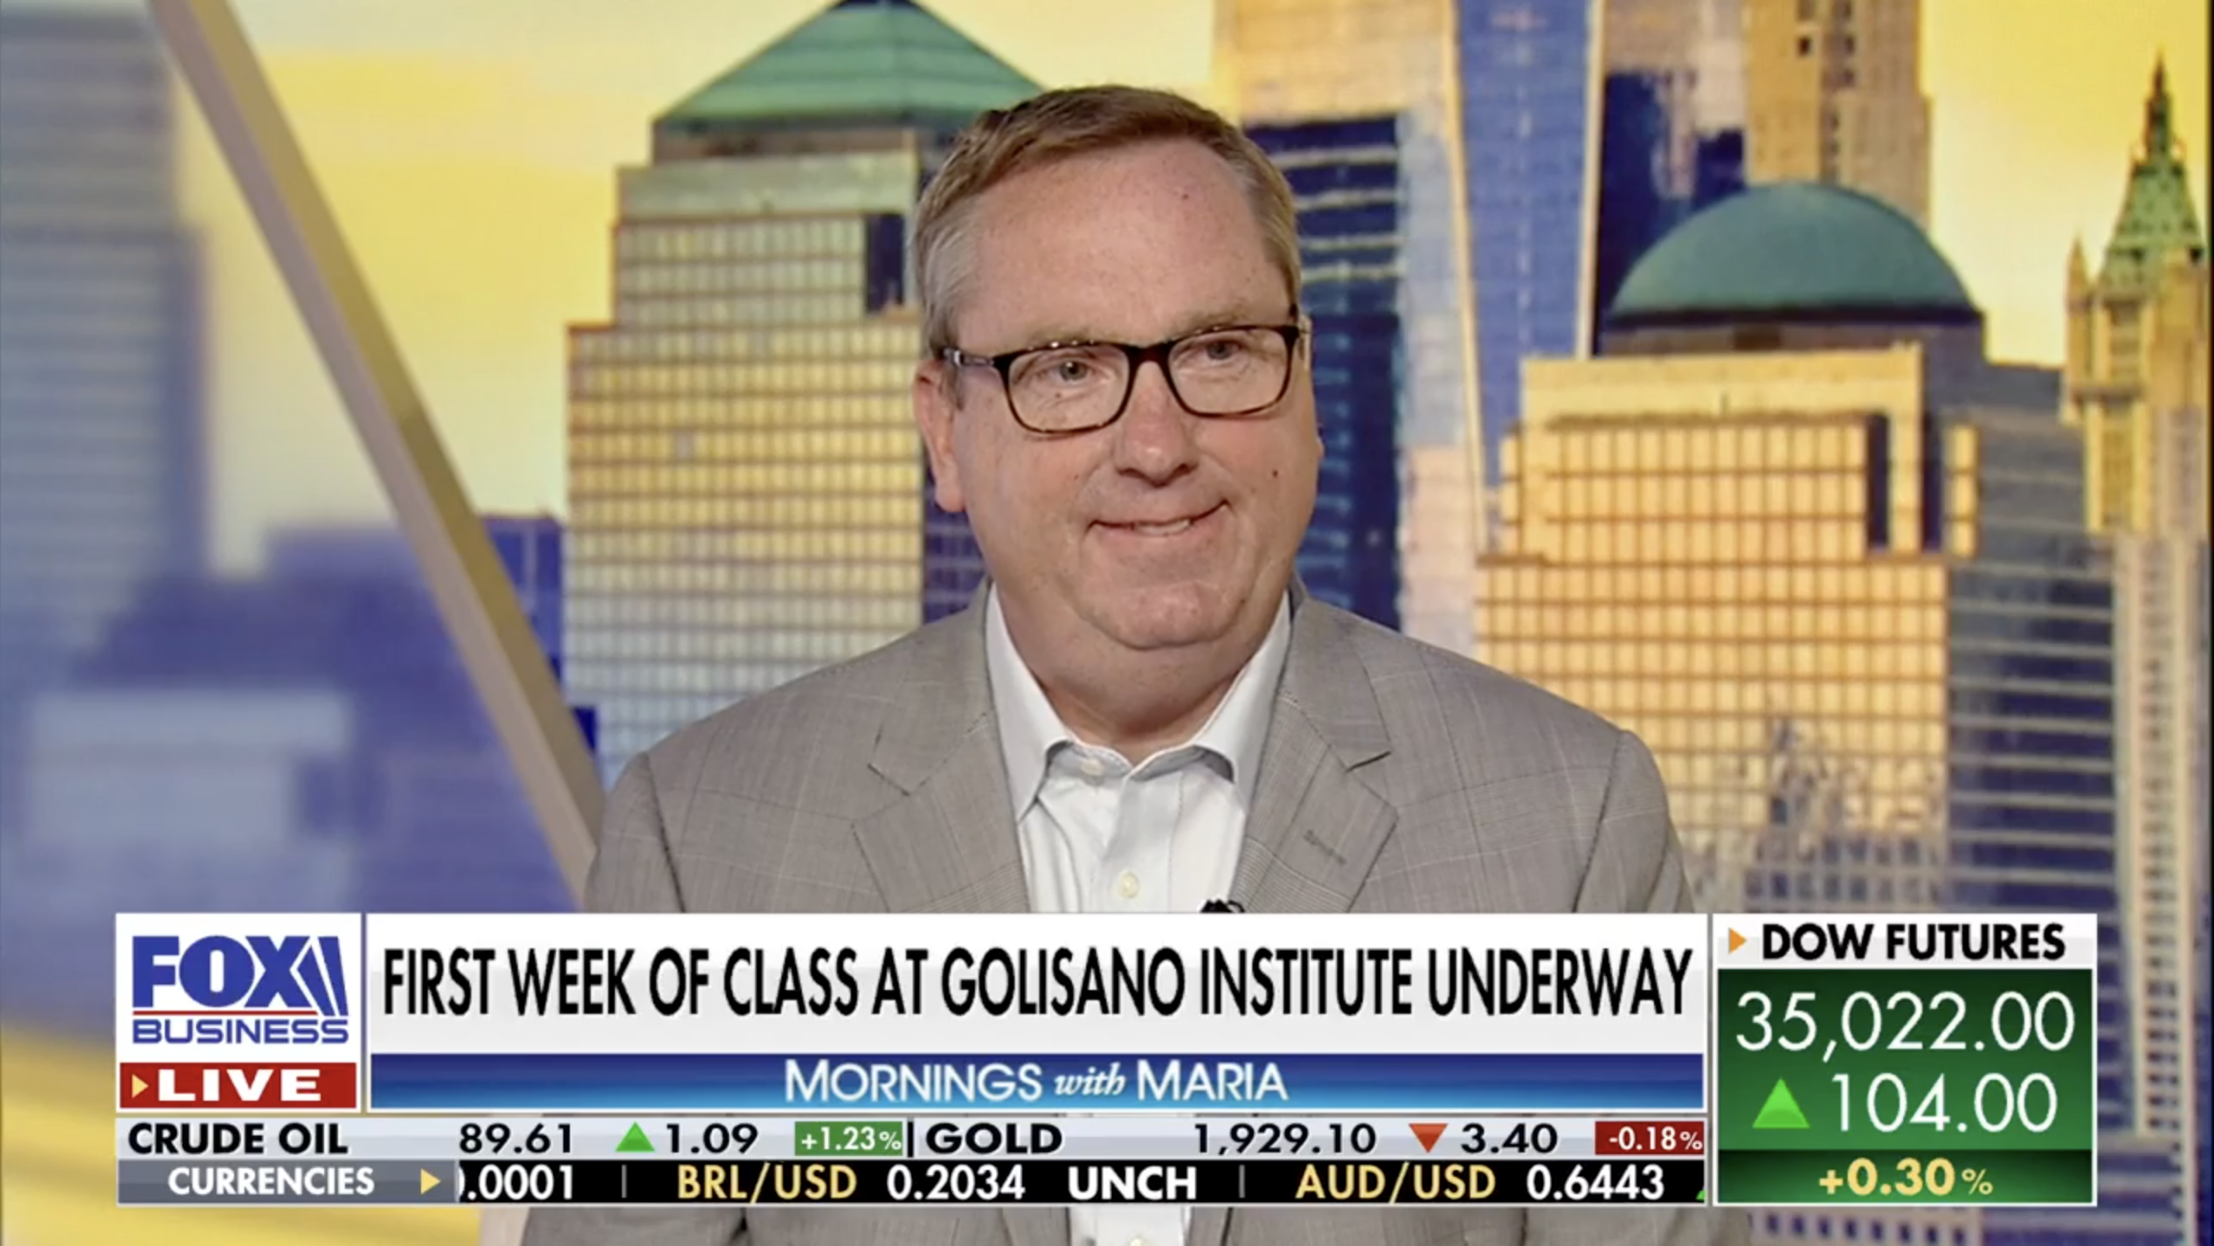 Ian Mortimer speaks with Maria Bartiromo on Fox Business News about how Golisano Institute aims to ‘move the time down’ on business education